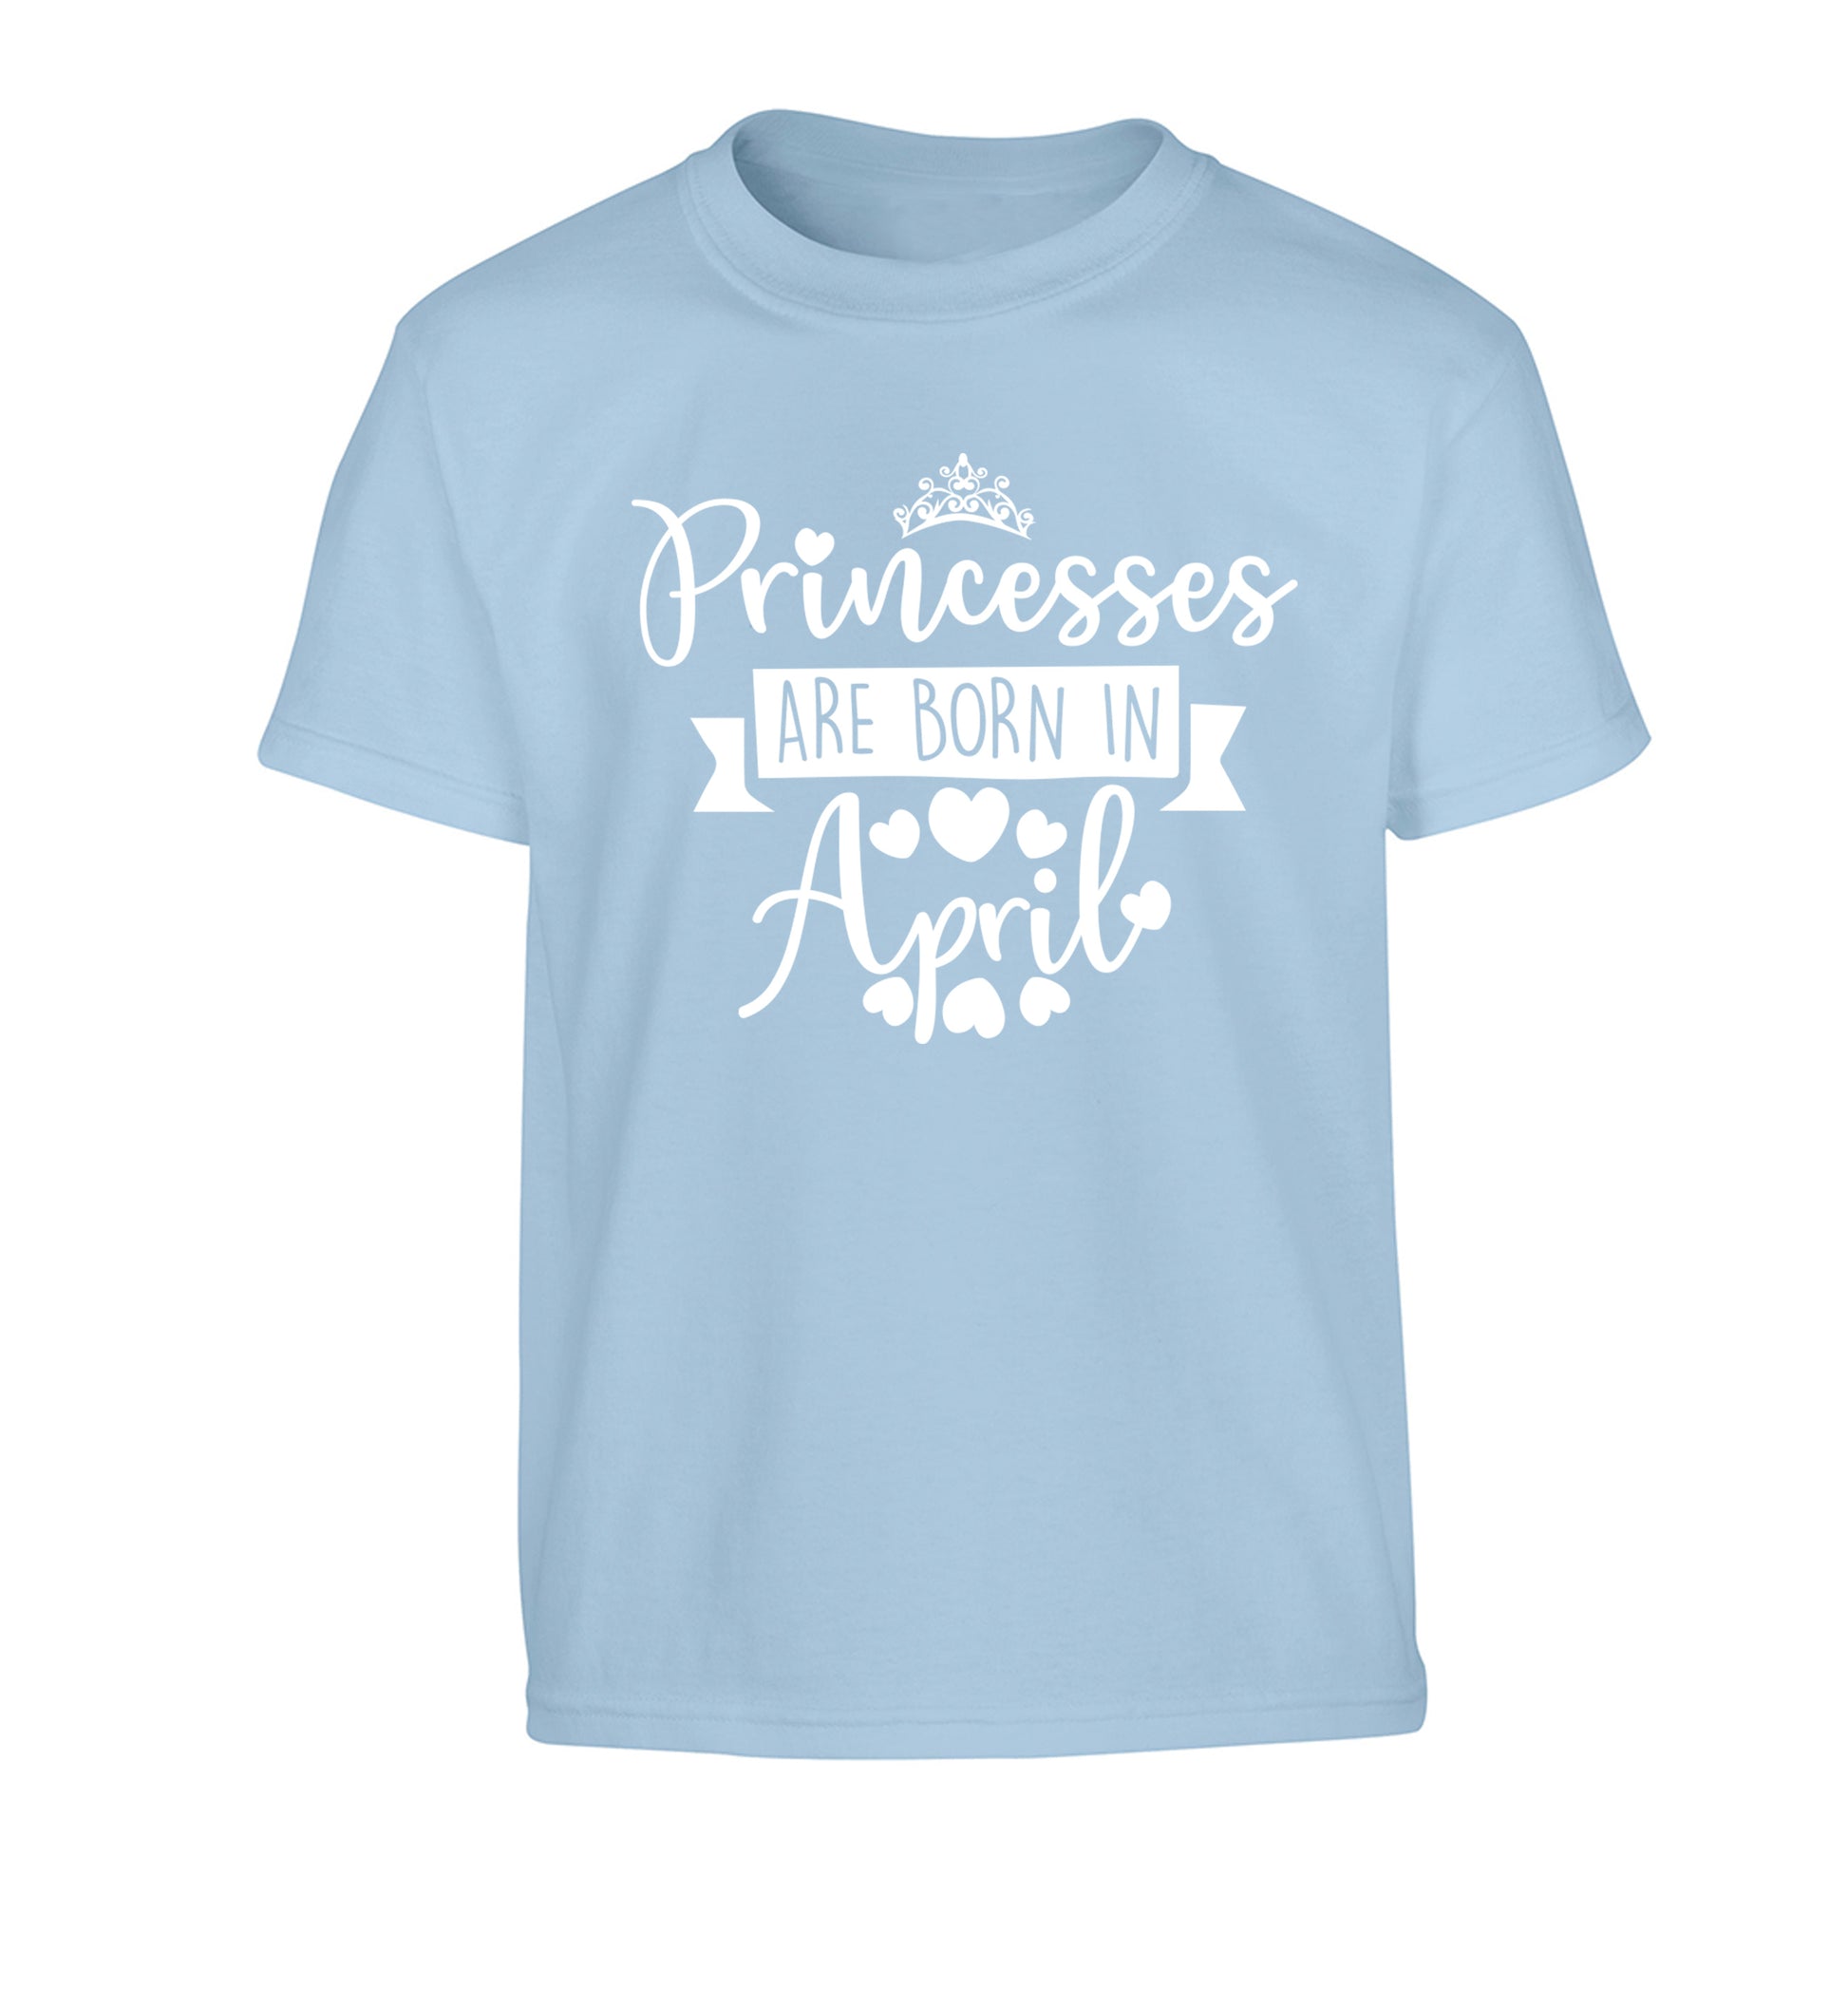 Princesses are born in April Children's light blue Tshirt 12-13 Years